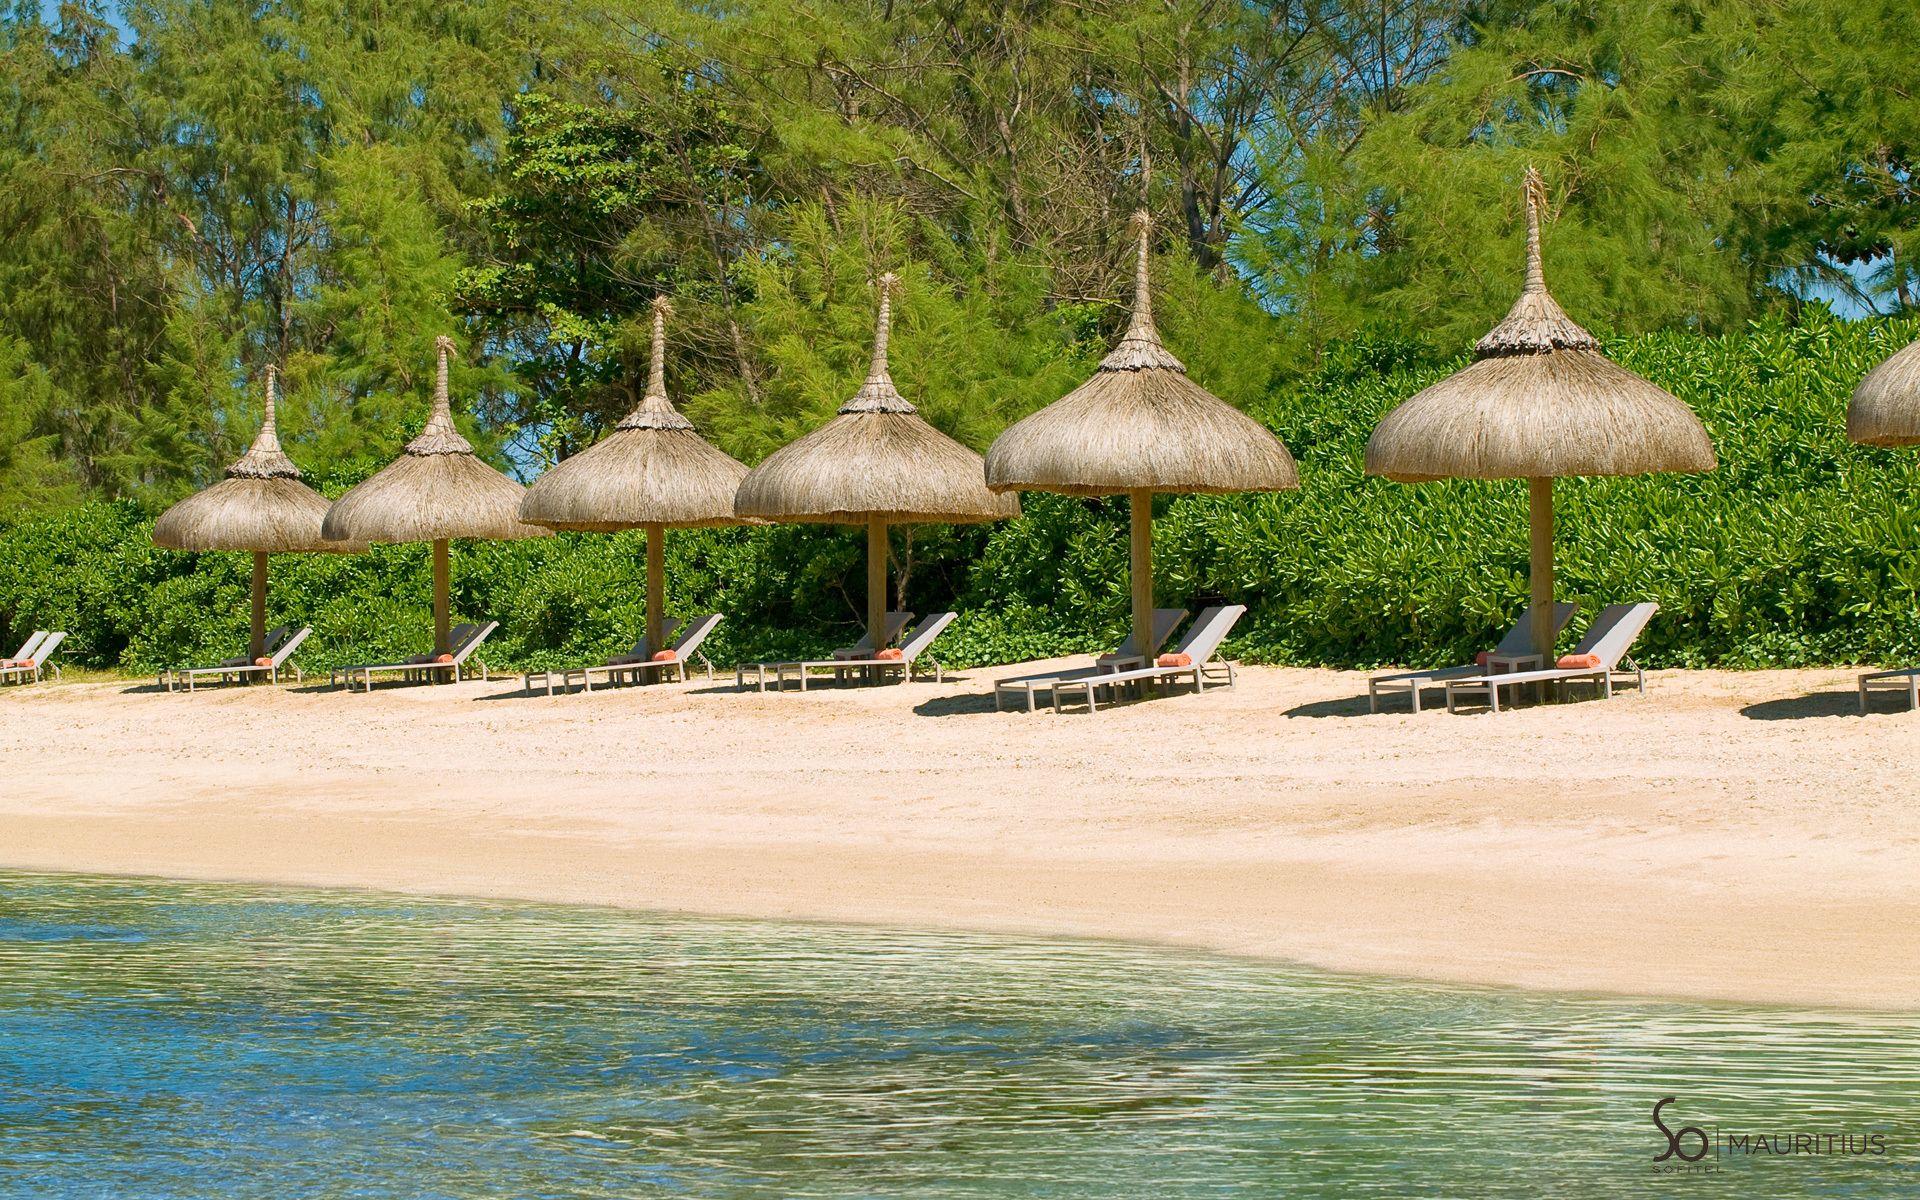 Thatched umbrellas on the Mauritius beach